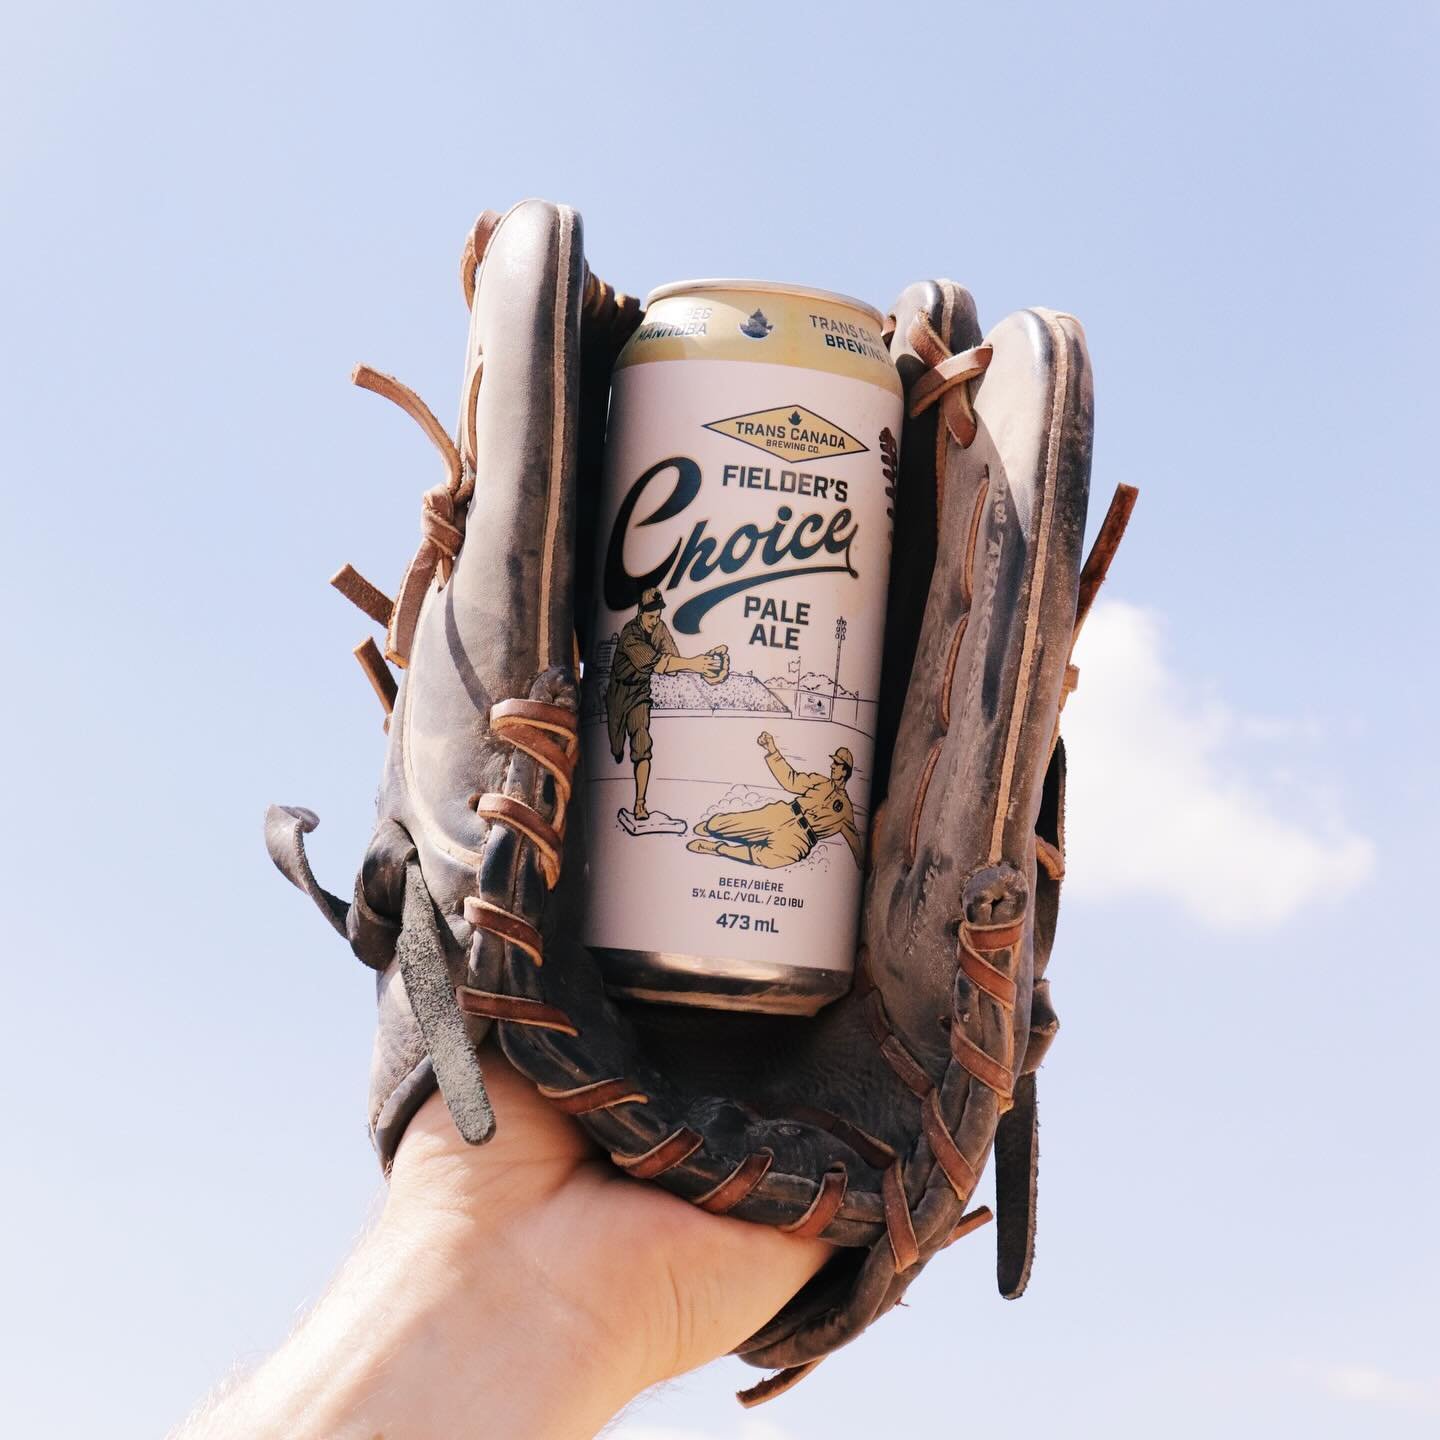 Batter up!⚾

Join us along with the Winnipeg Goldeyes Baseball Club this Thursday, May 2, in our taproom from 6:00 p.m. to 8:00 p.m. to celebrate the launch of Fielder&rsquo;s Choice Pale Ale.

Meet the Goldeyes, get a picture with Goldie, and enjoy 